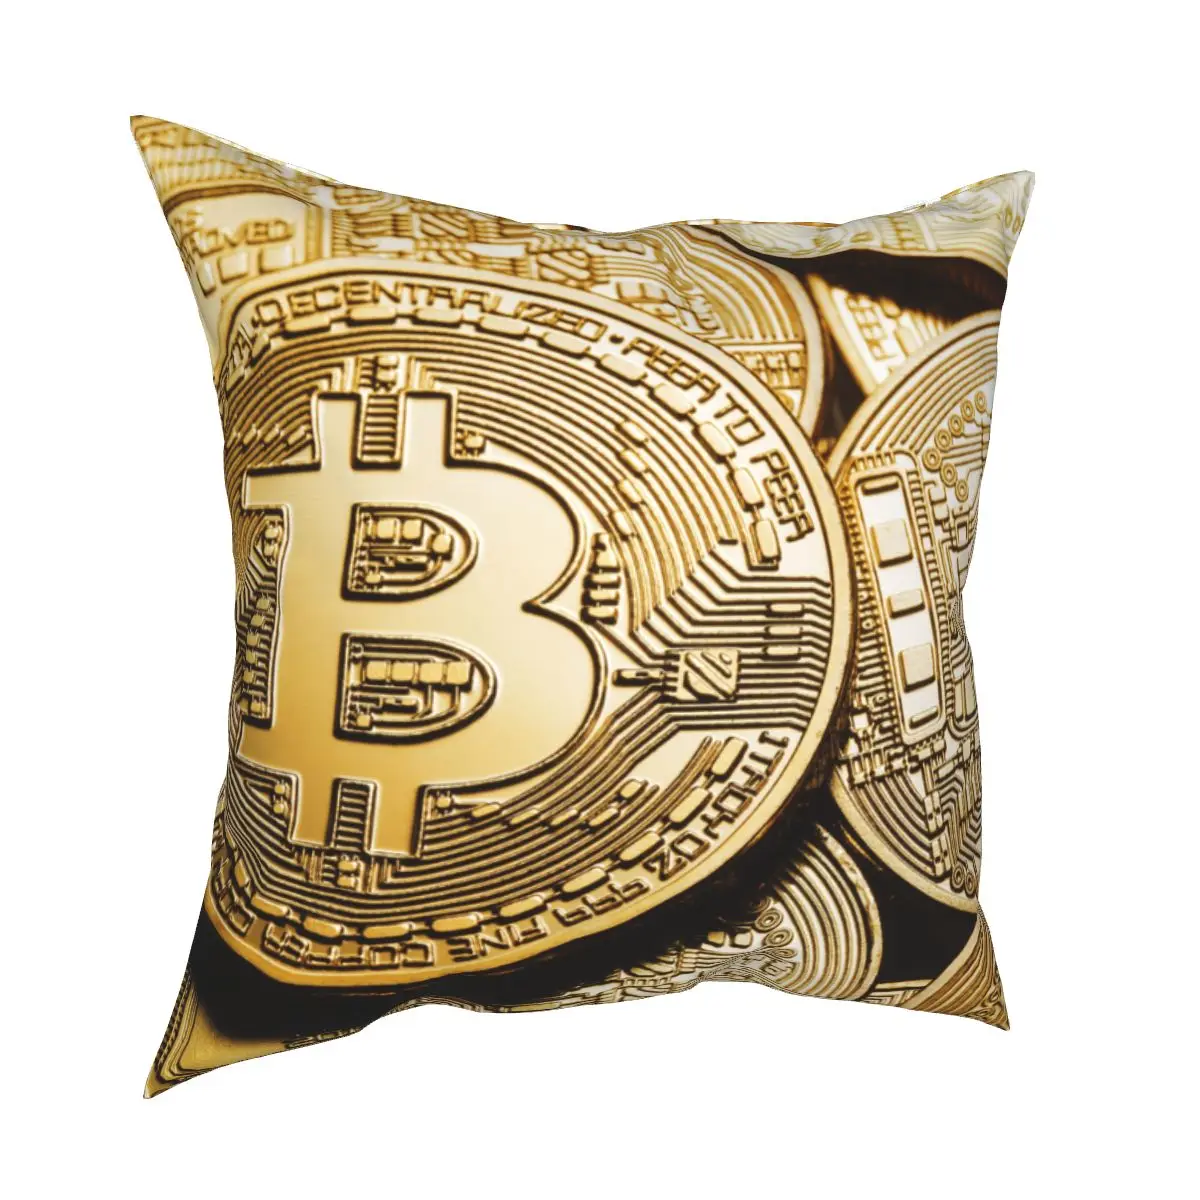 

Bitcoin 3D Printed Pillowcase Soft Cushion Cover Decor Cryptocurrency Crypto BTC Blockchain Pillow Case Cover for Bedroom